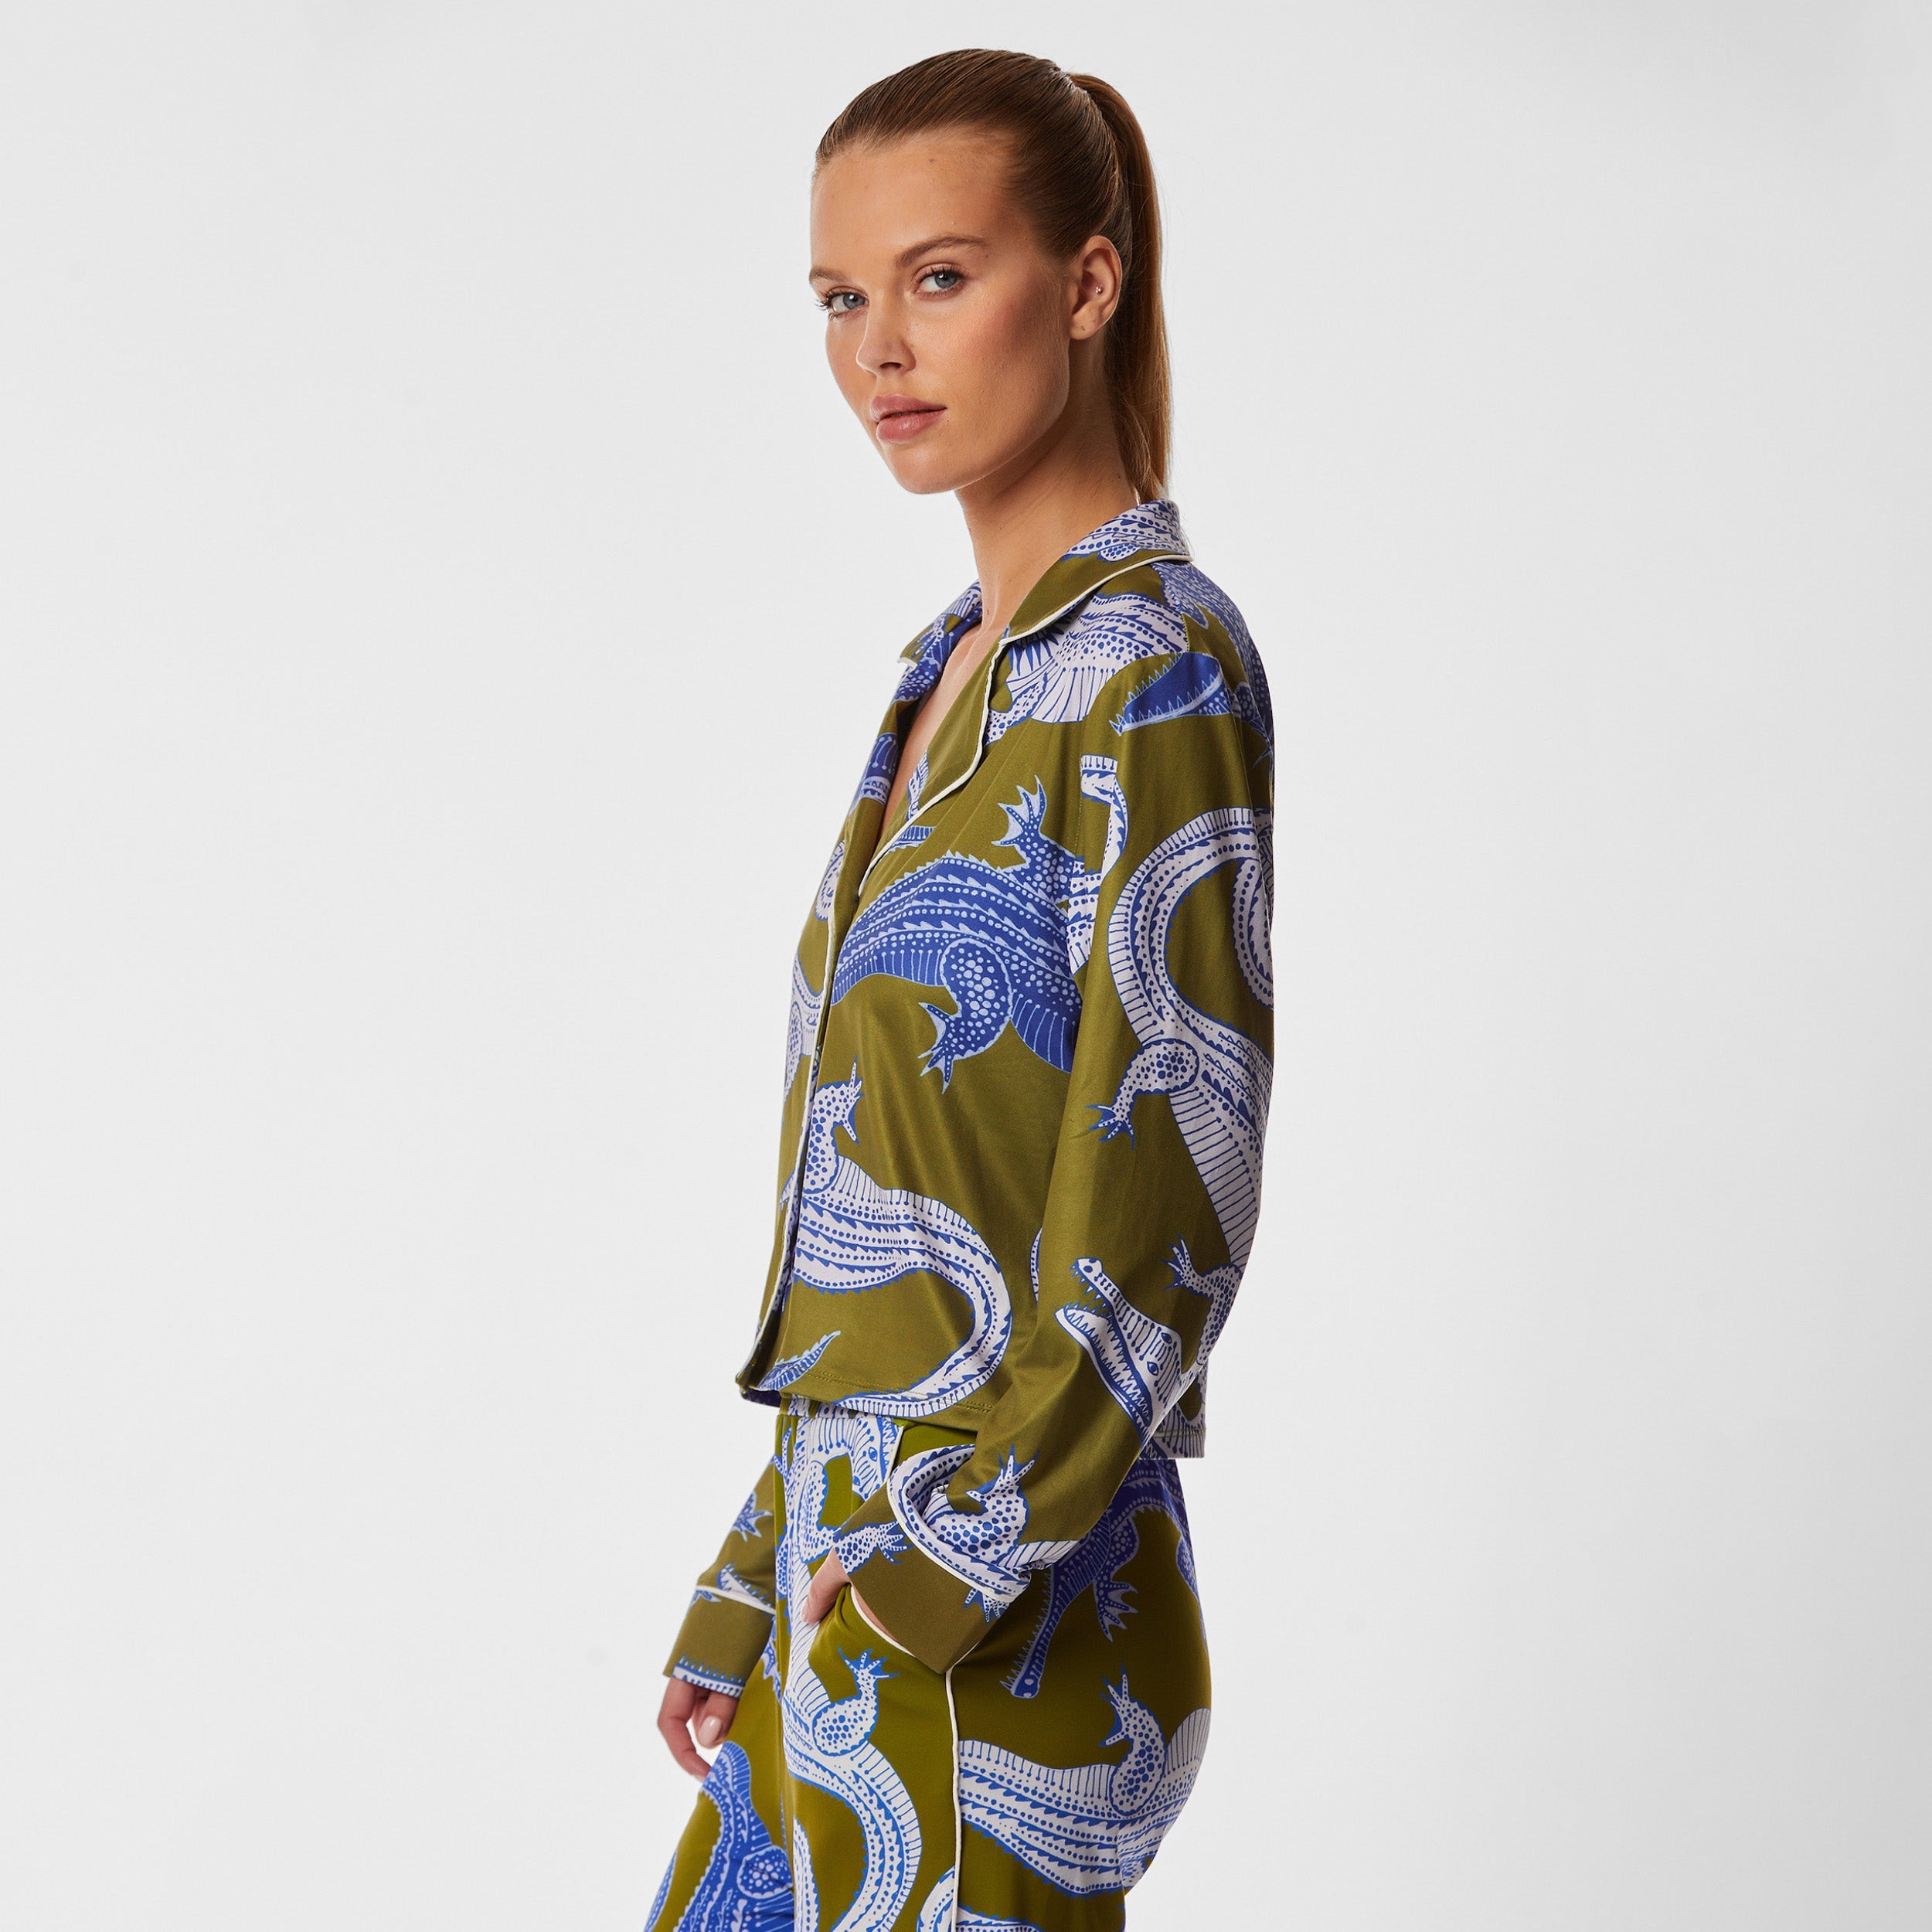 Side view of woman wearing breathable, relaxed and buttery smooth pajama shirt featuring a button front top with notch collar and Nile gator print.